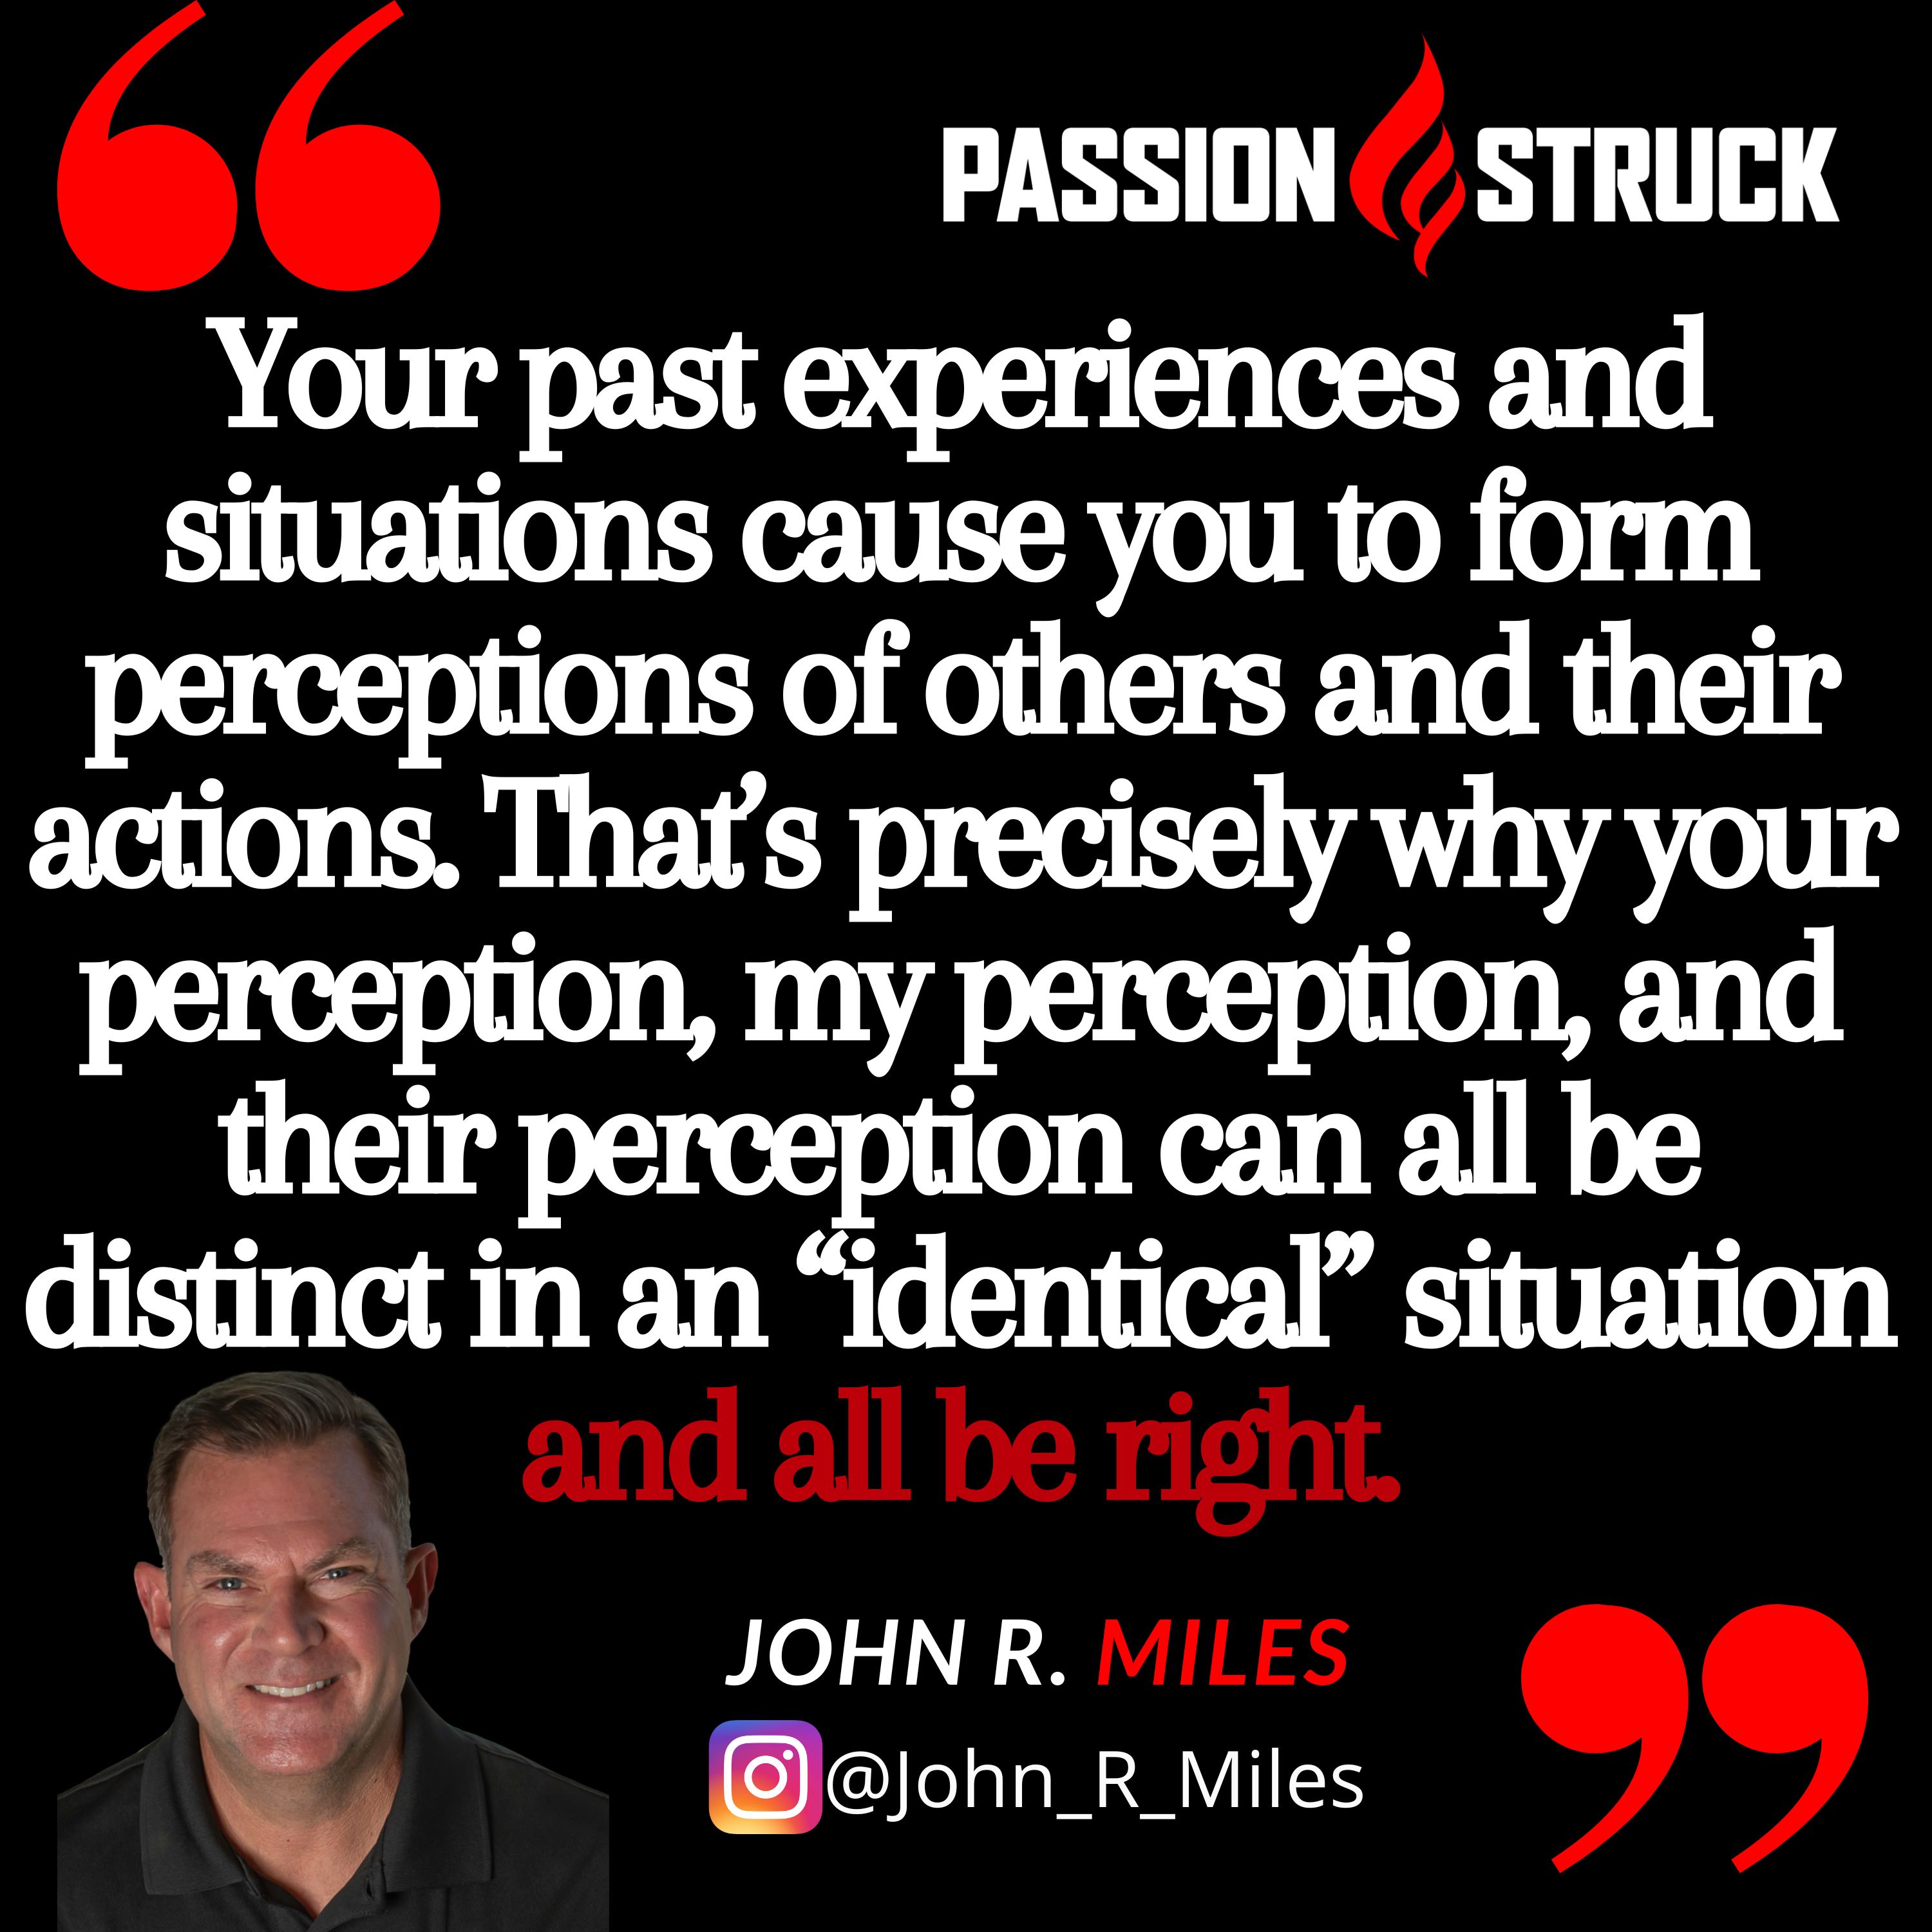 Quote by John R. Miles on perception: 